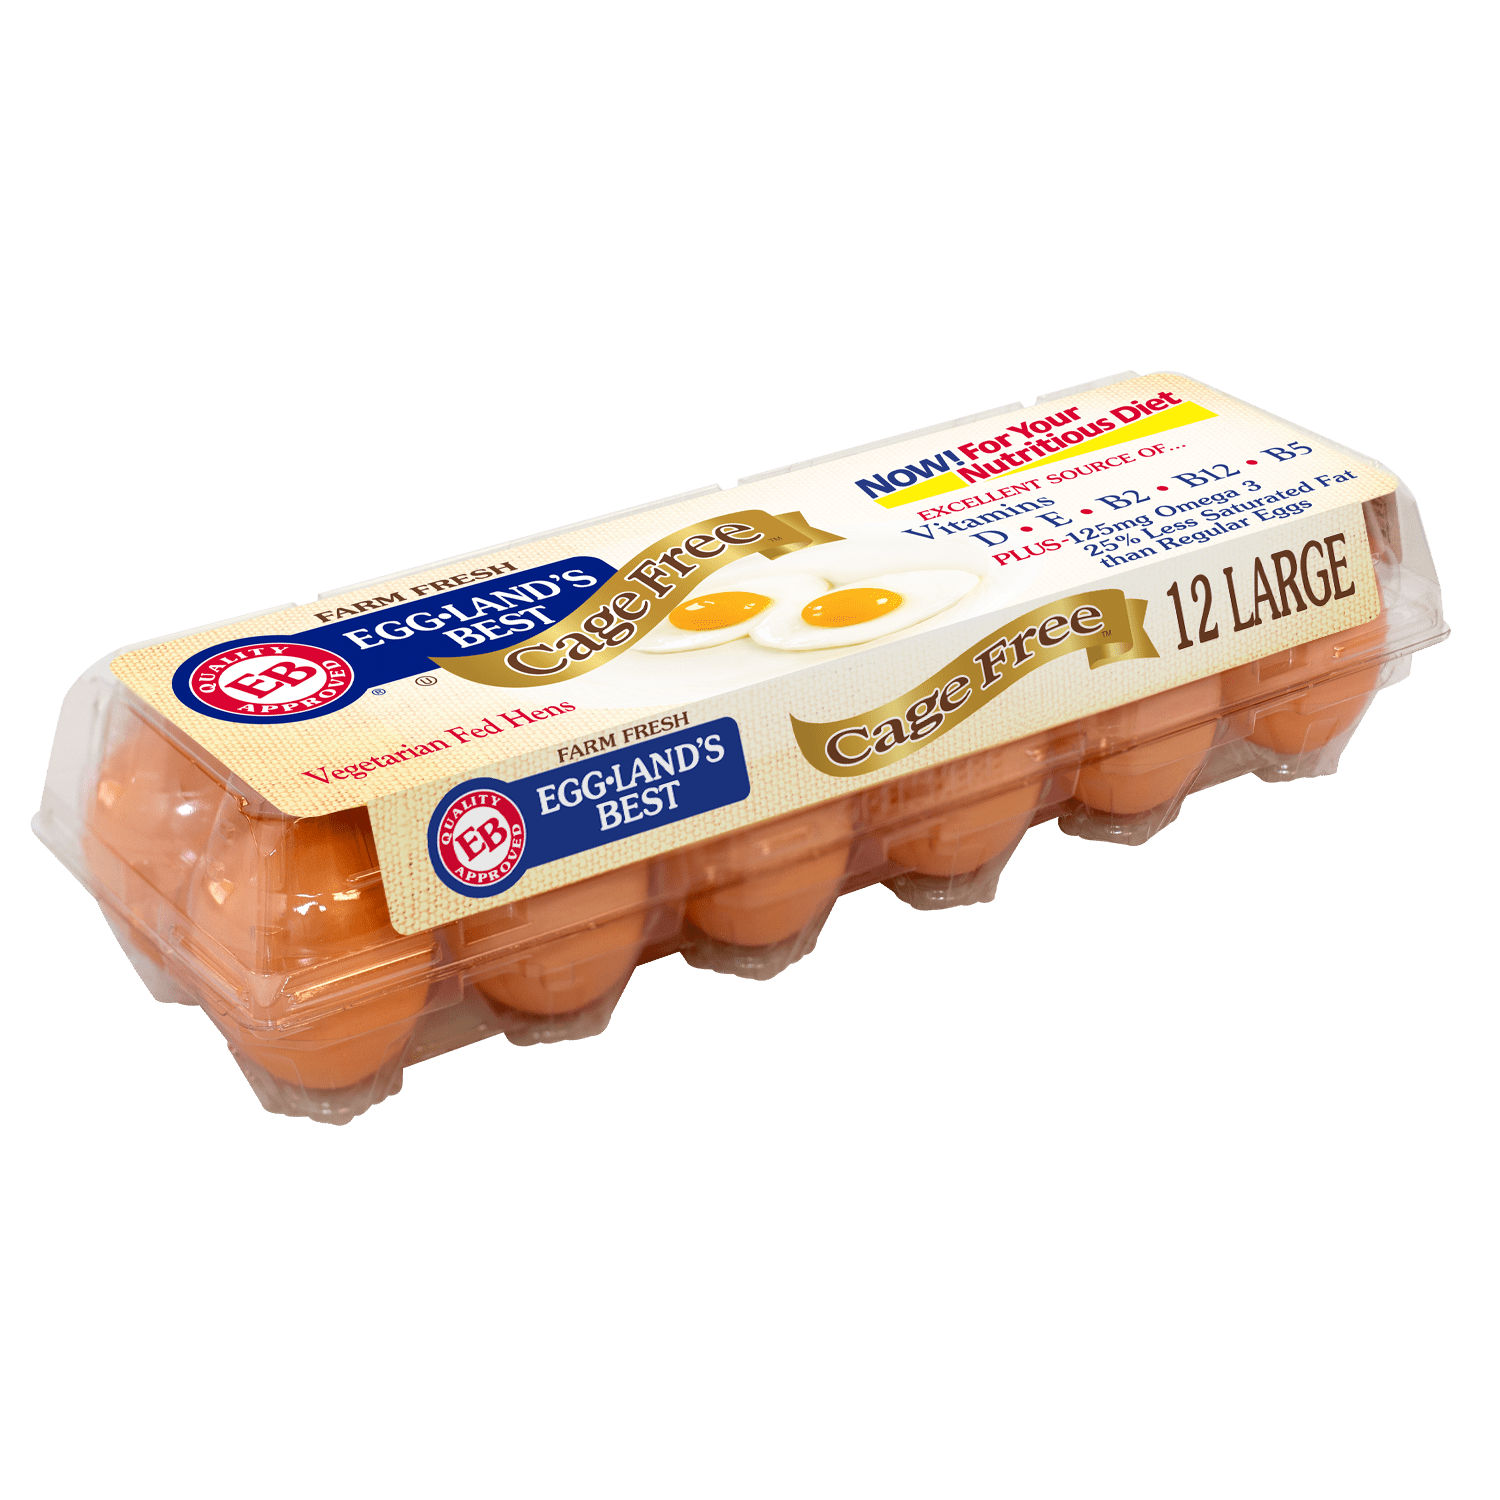 Eggland's Best Farm Fresh Cage Free Large, Brown, Grade A Eggs, 12